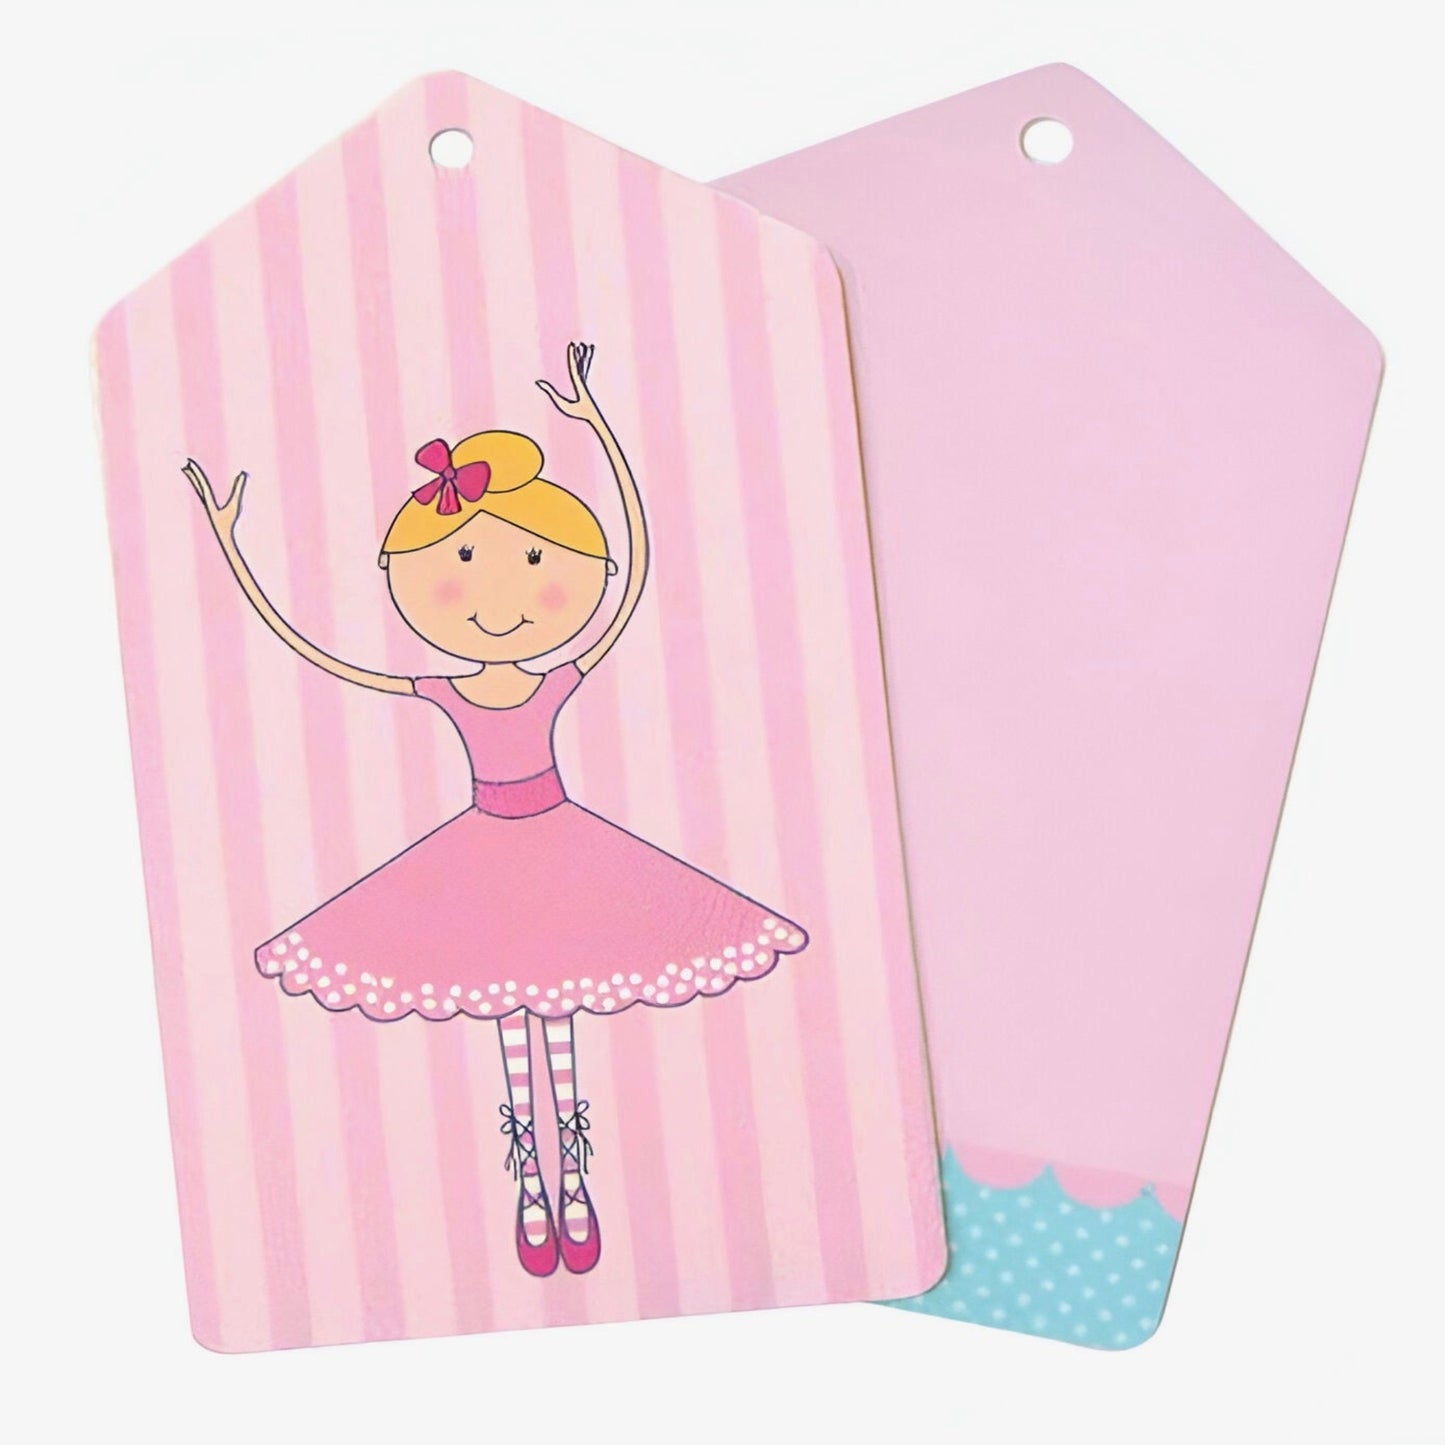 Pink Ballerina Gift Tags with dancing Ballerina on pink and white stripes.